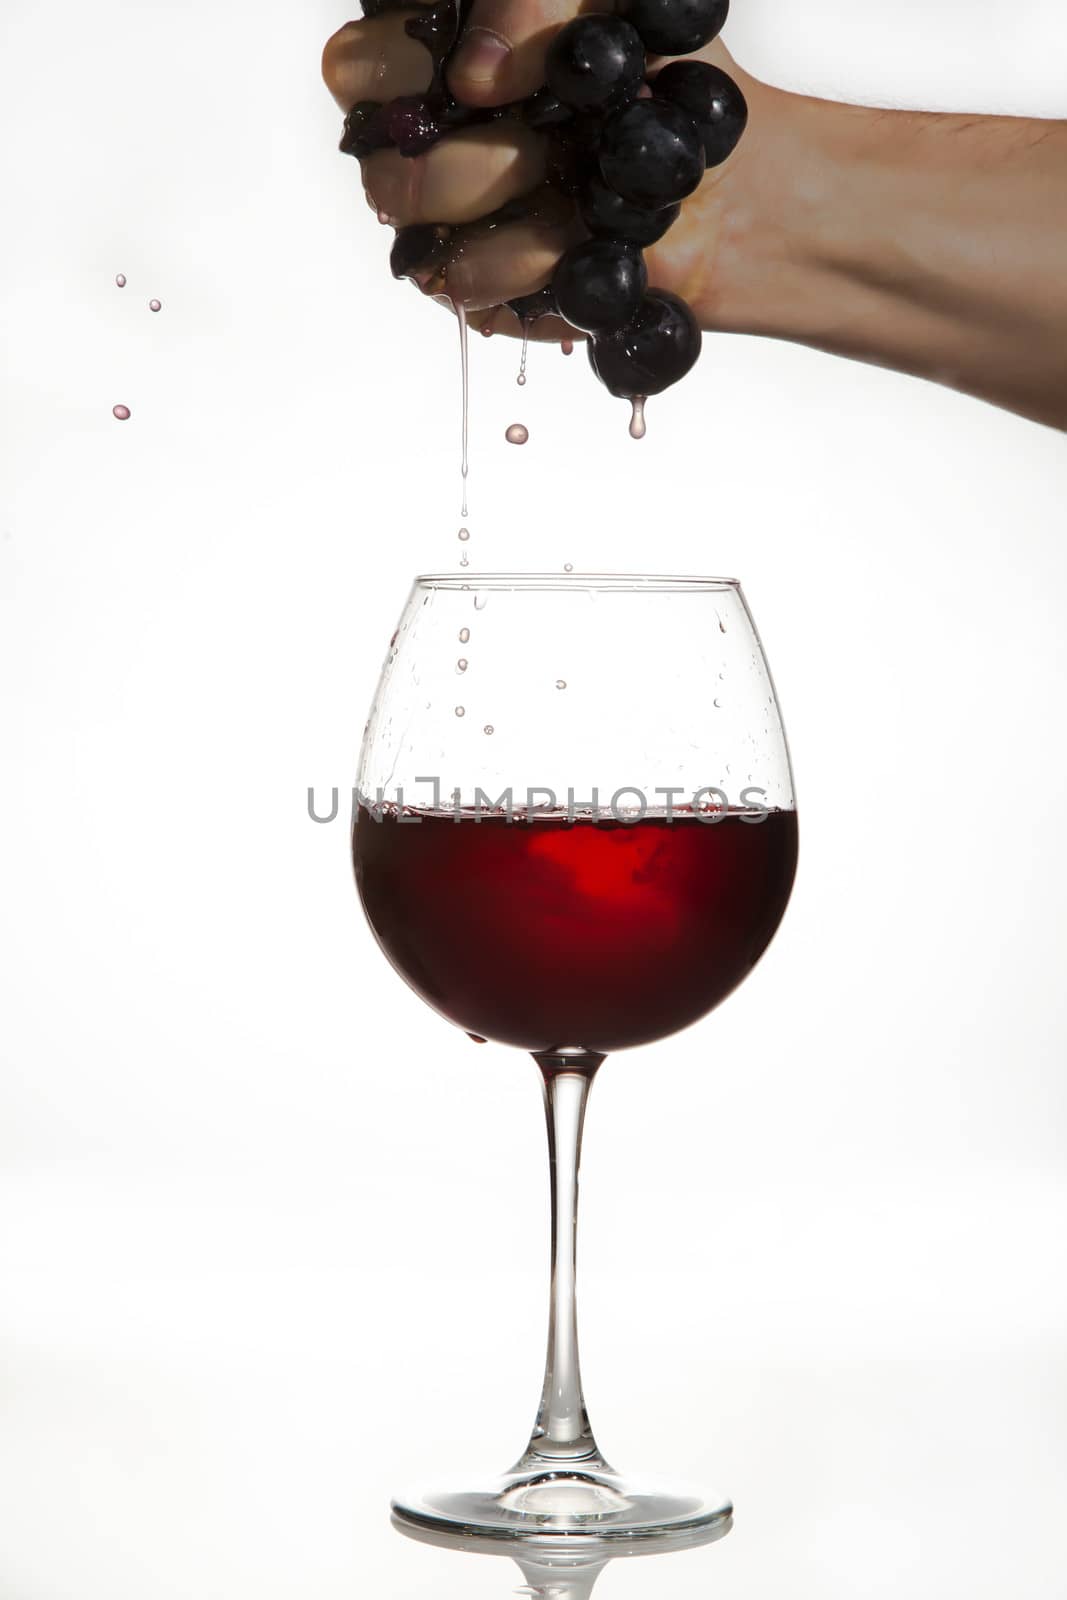 Hand is squeezing grapes to make juice over a glass of red wine